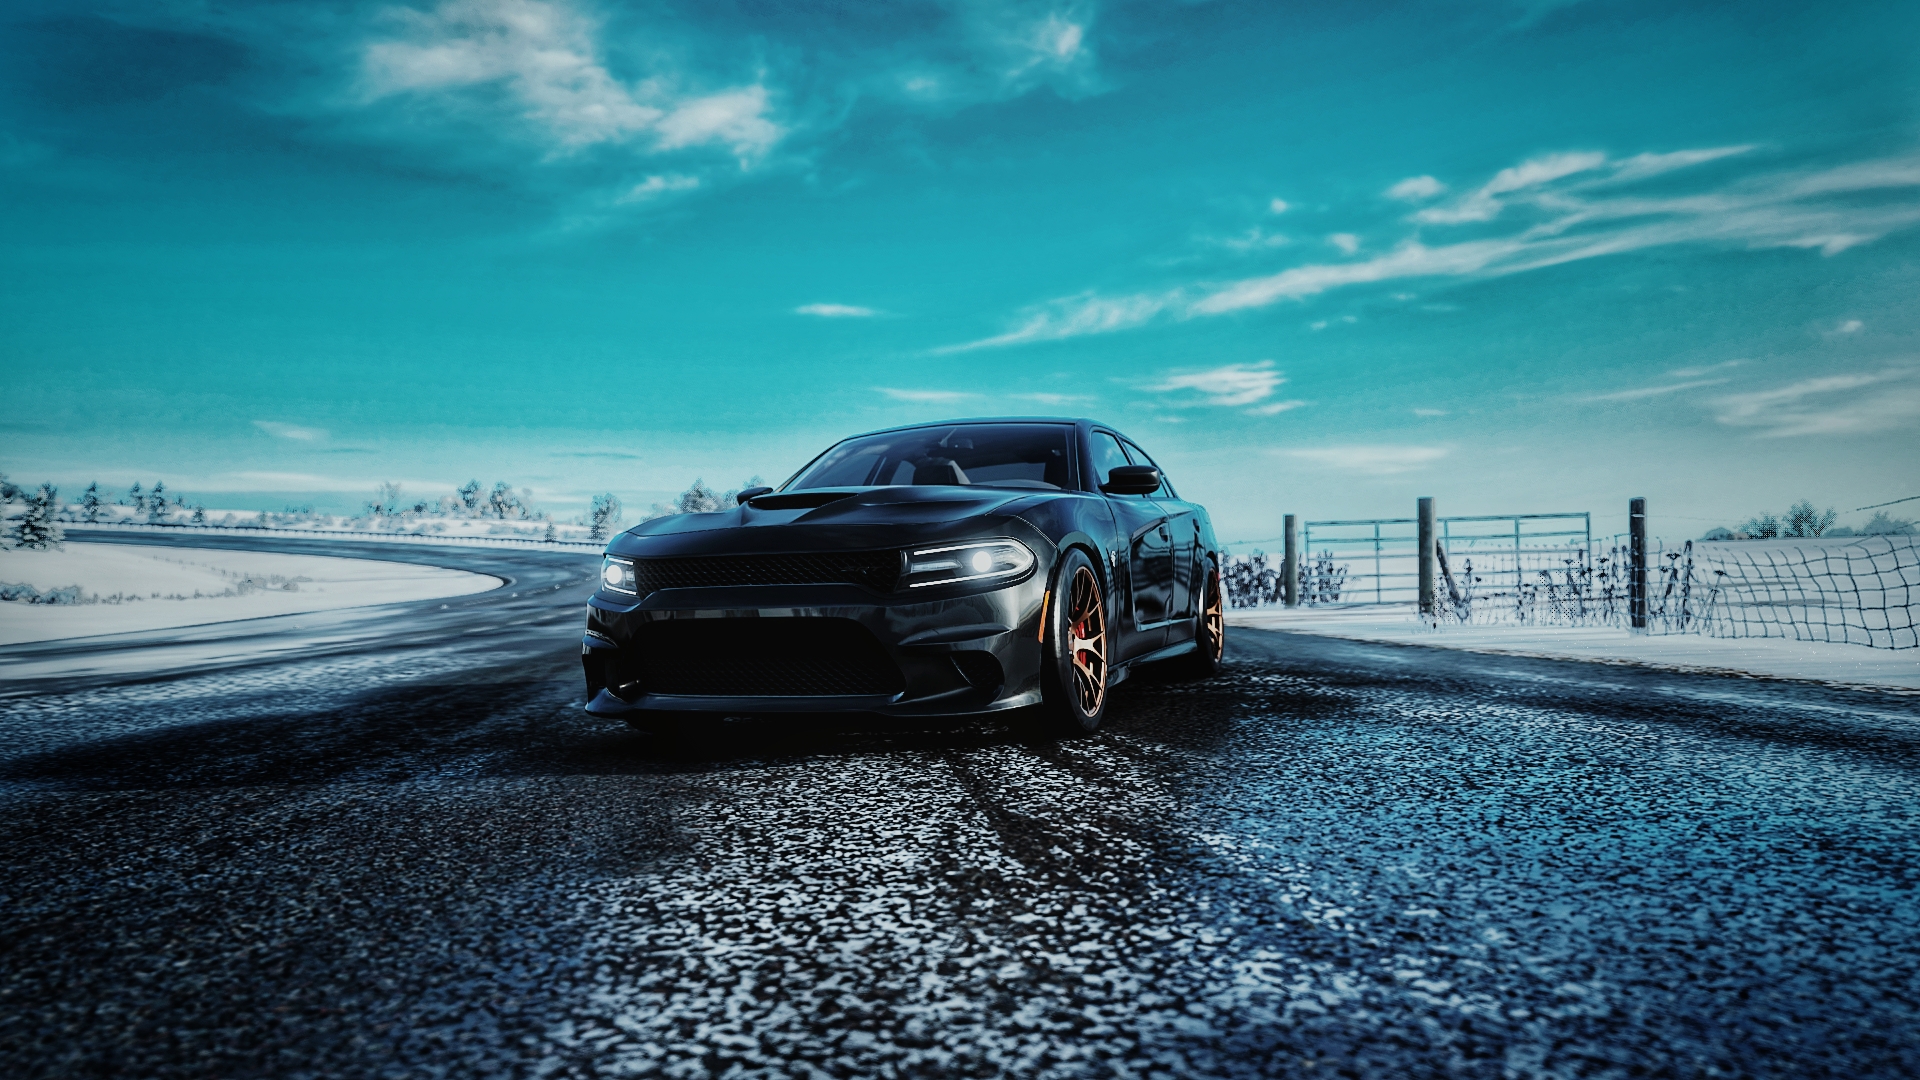 General 1920x1080 Dodge Dodge Charger hellcat Brembo Forza Horizon 4 SRT Fortune Island muscle cars American cars Stellantis video games PlaygroundGames Turn 10 Studios Xbox Game Studios V8 engine